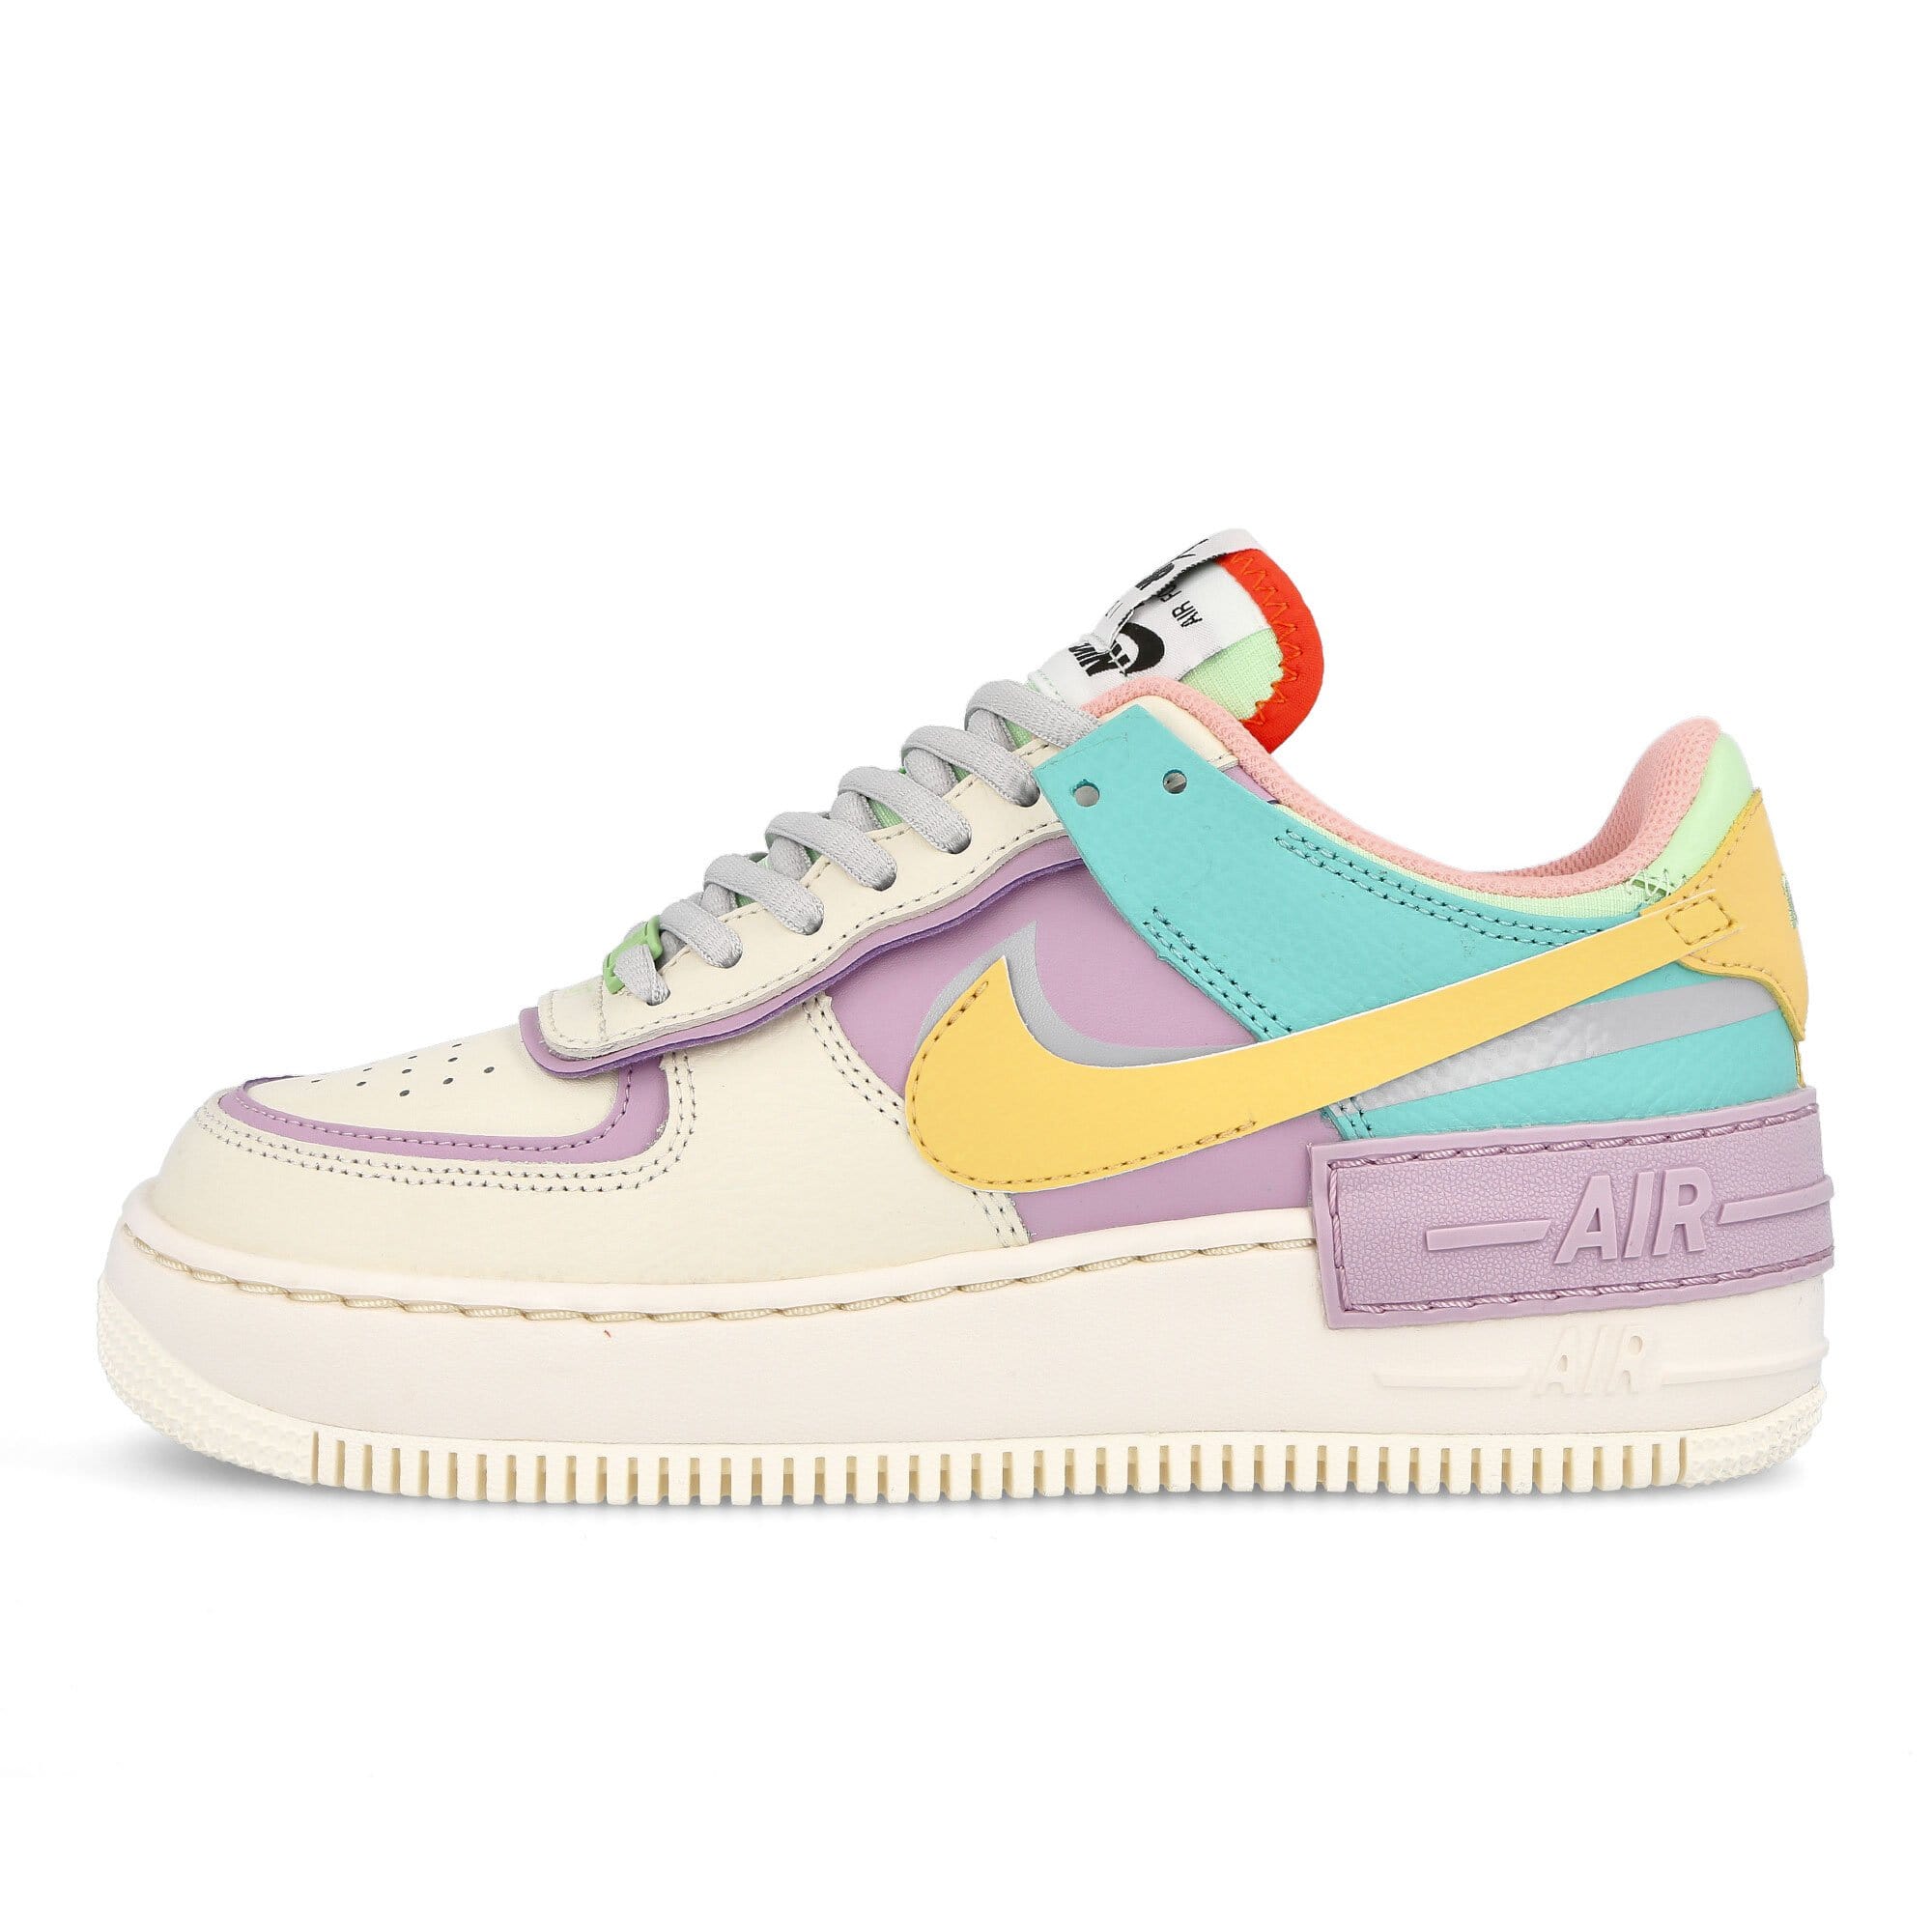 nike air force 1 shadow pale ivory size 8